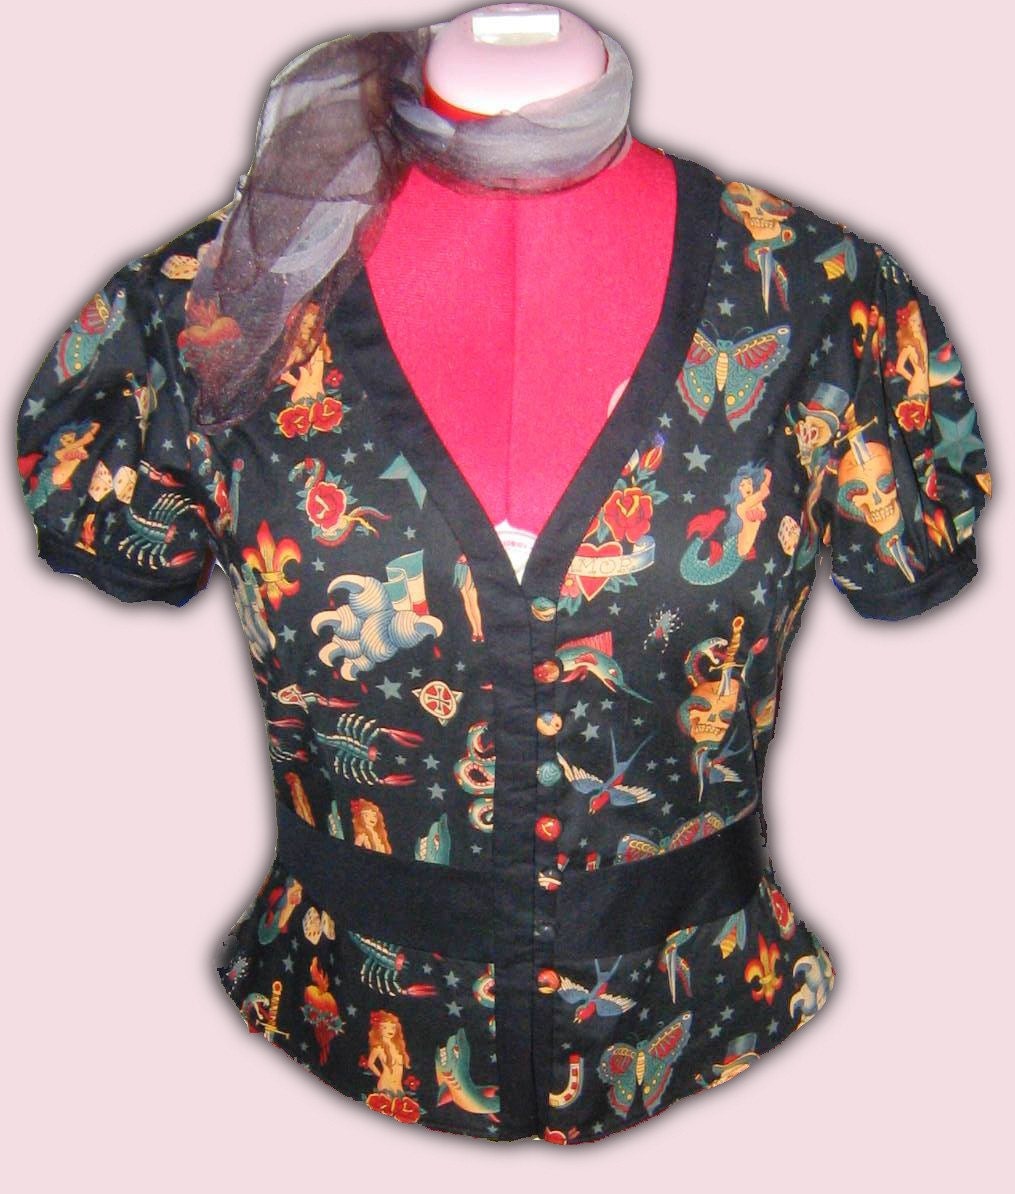 It is made of a cotton tattoo flash print fabric and has puffed sleeves, 